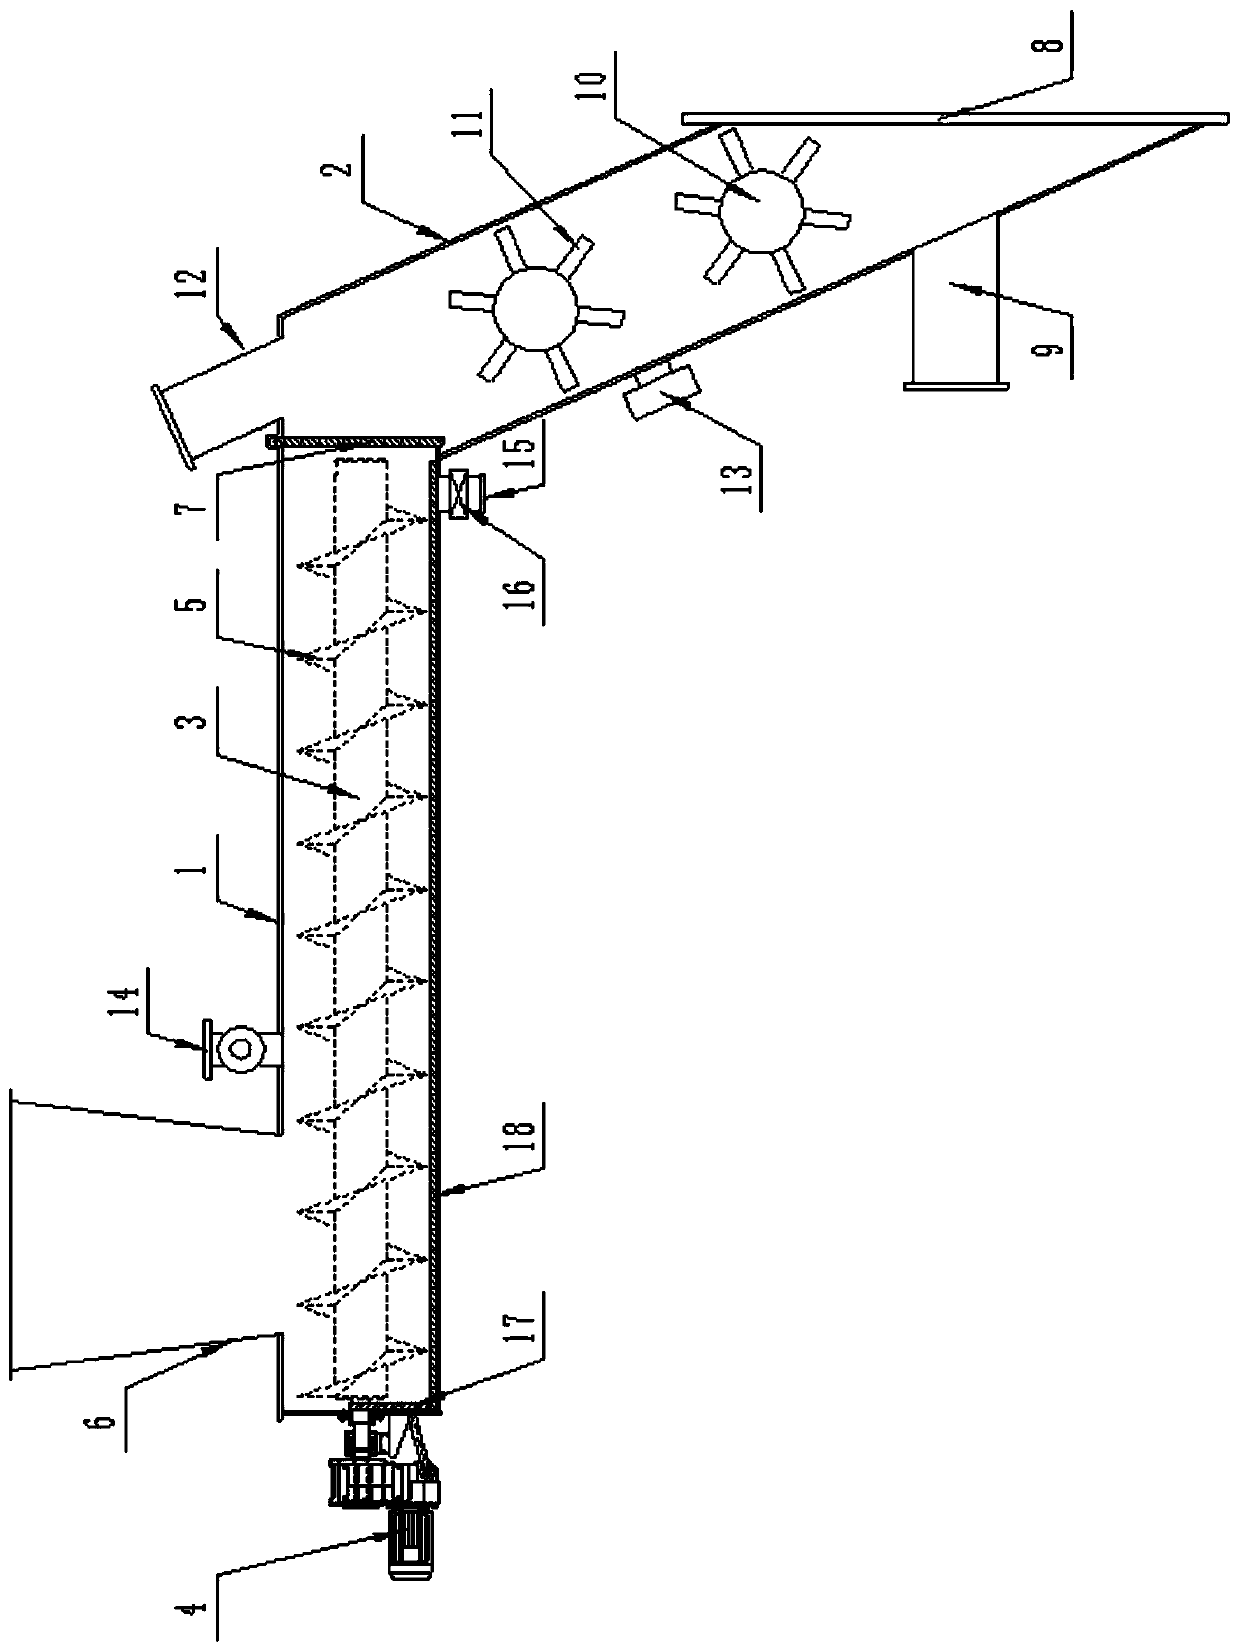 Feeding device having backdraft cutoff function and used for biomass fuel boiler